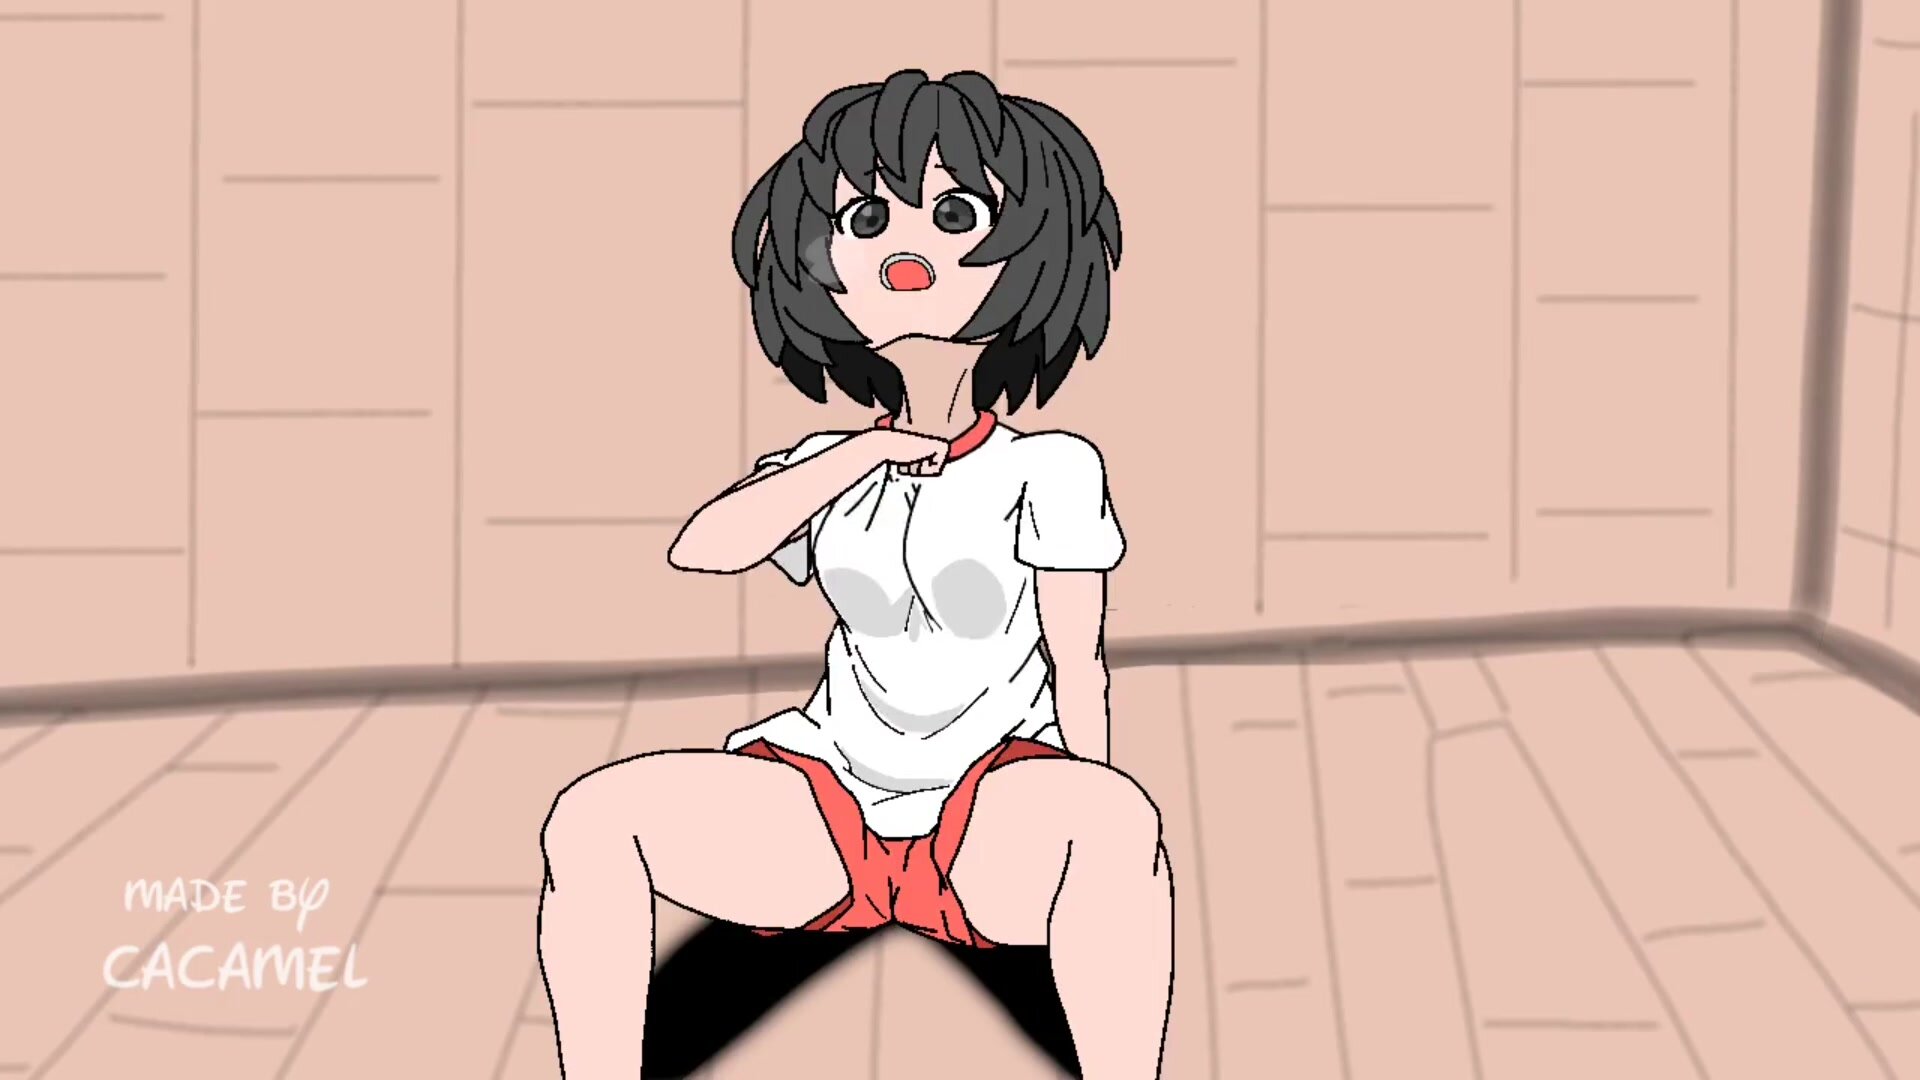 Hypnosis Anime Porn Fart - Anime girl face farts animation compelation 13 - ThisVid.com